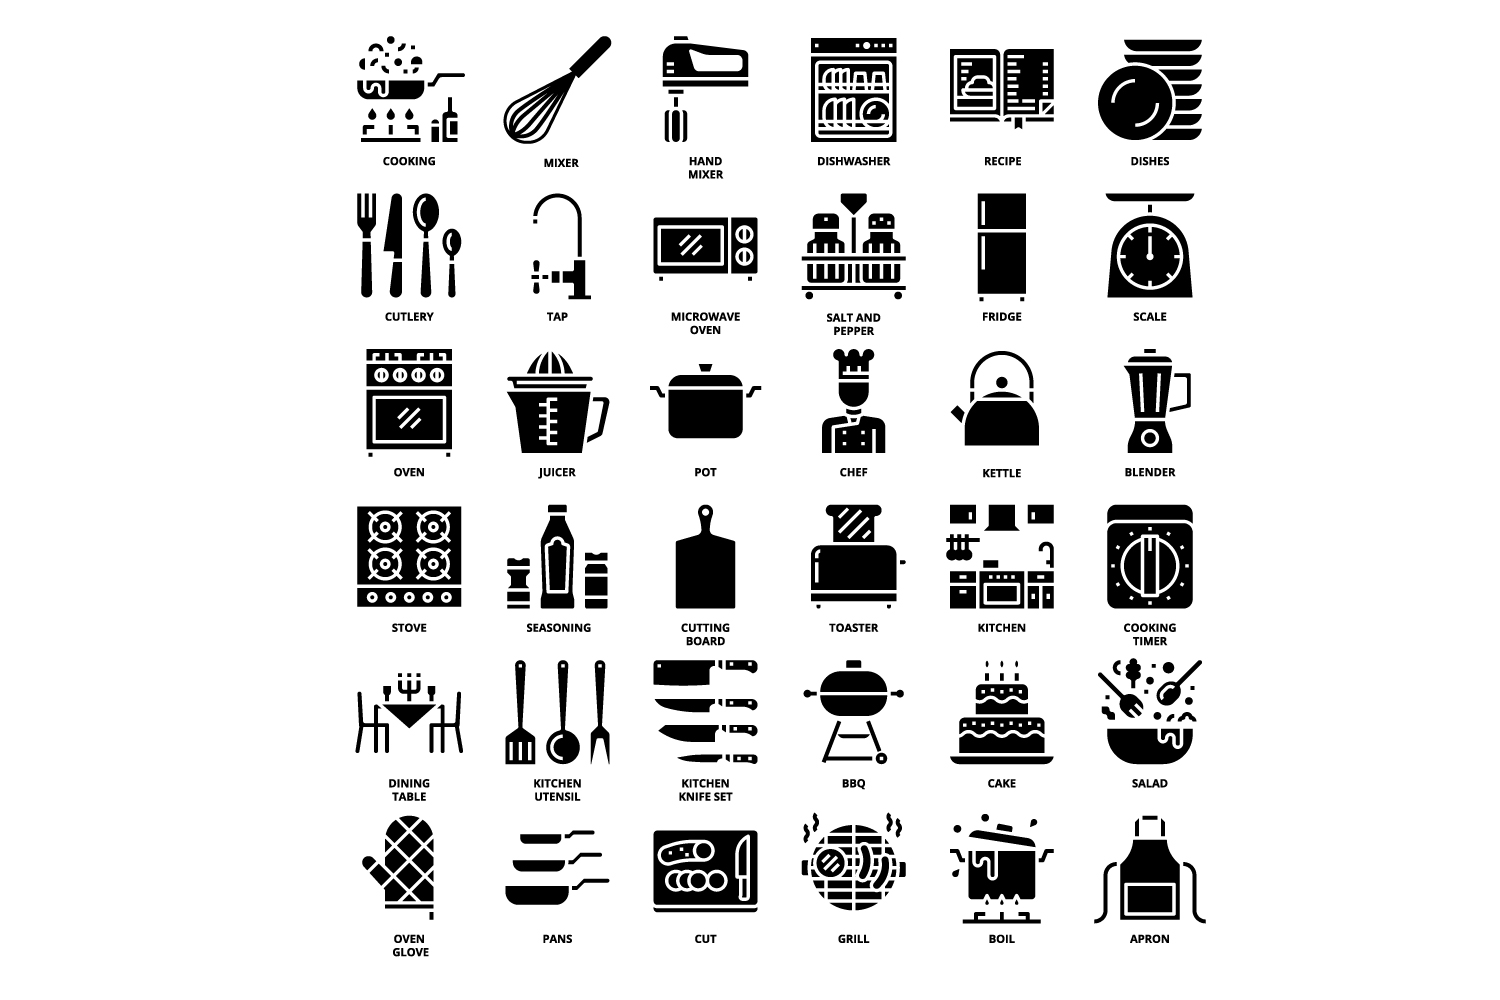 Black and white image of kitchen appliances.